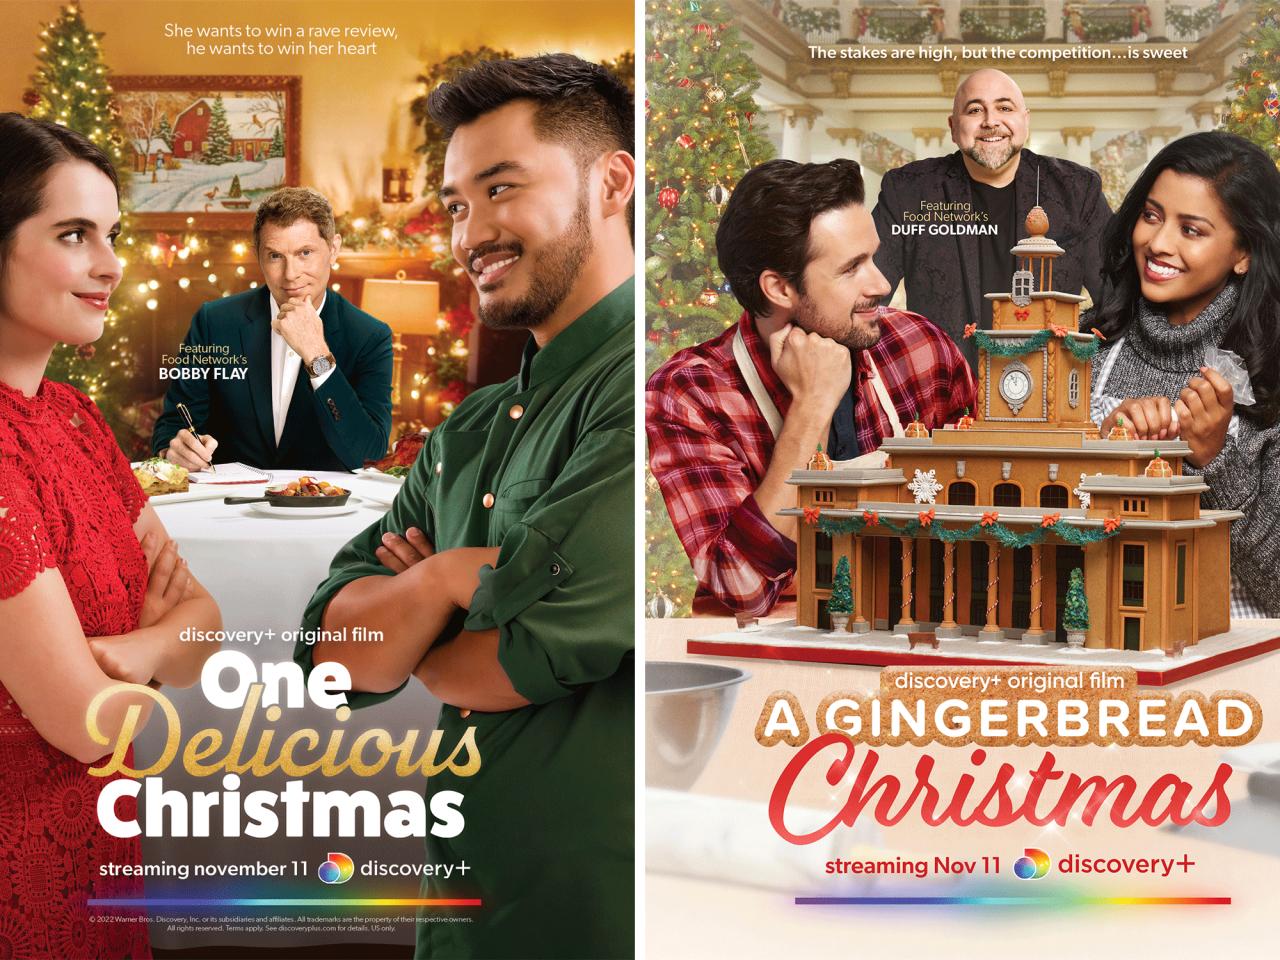 Get Ready for Two New Holiday Feature Films Starring Fan-Favorites